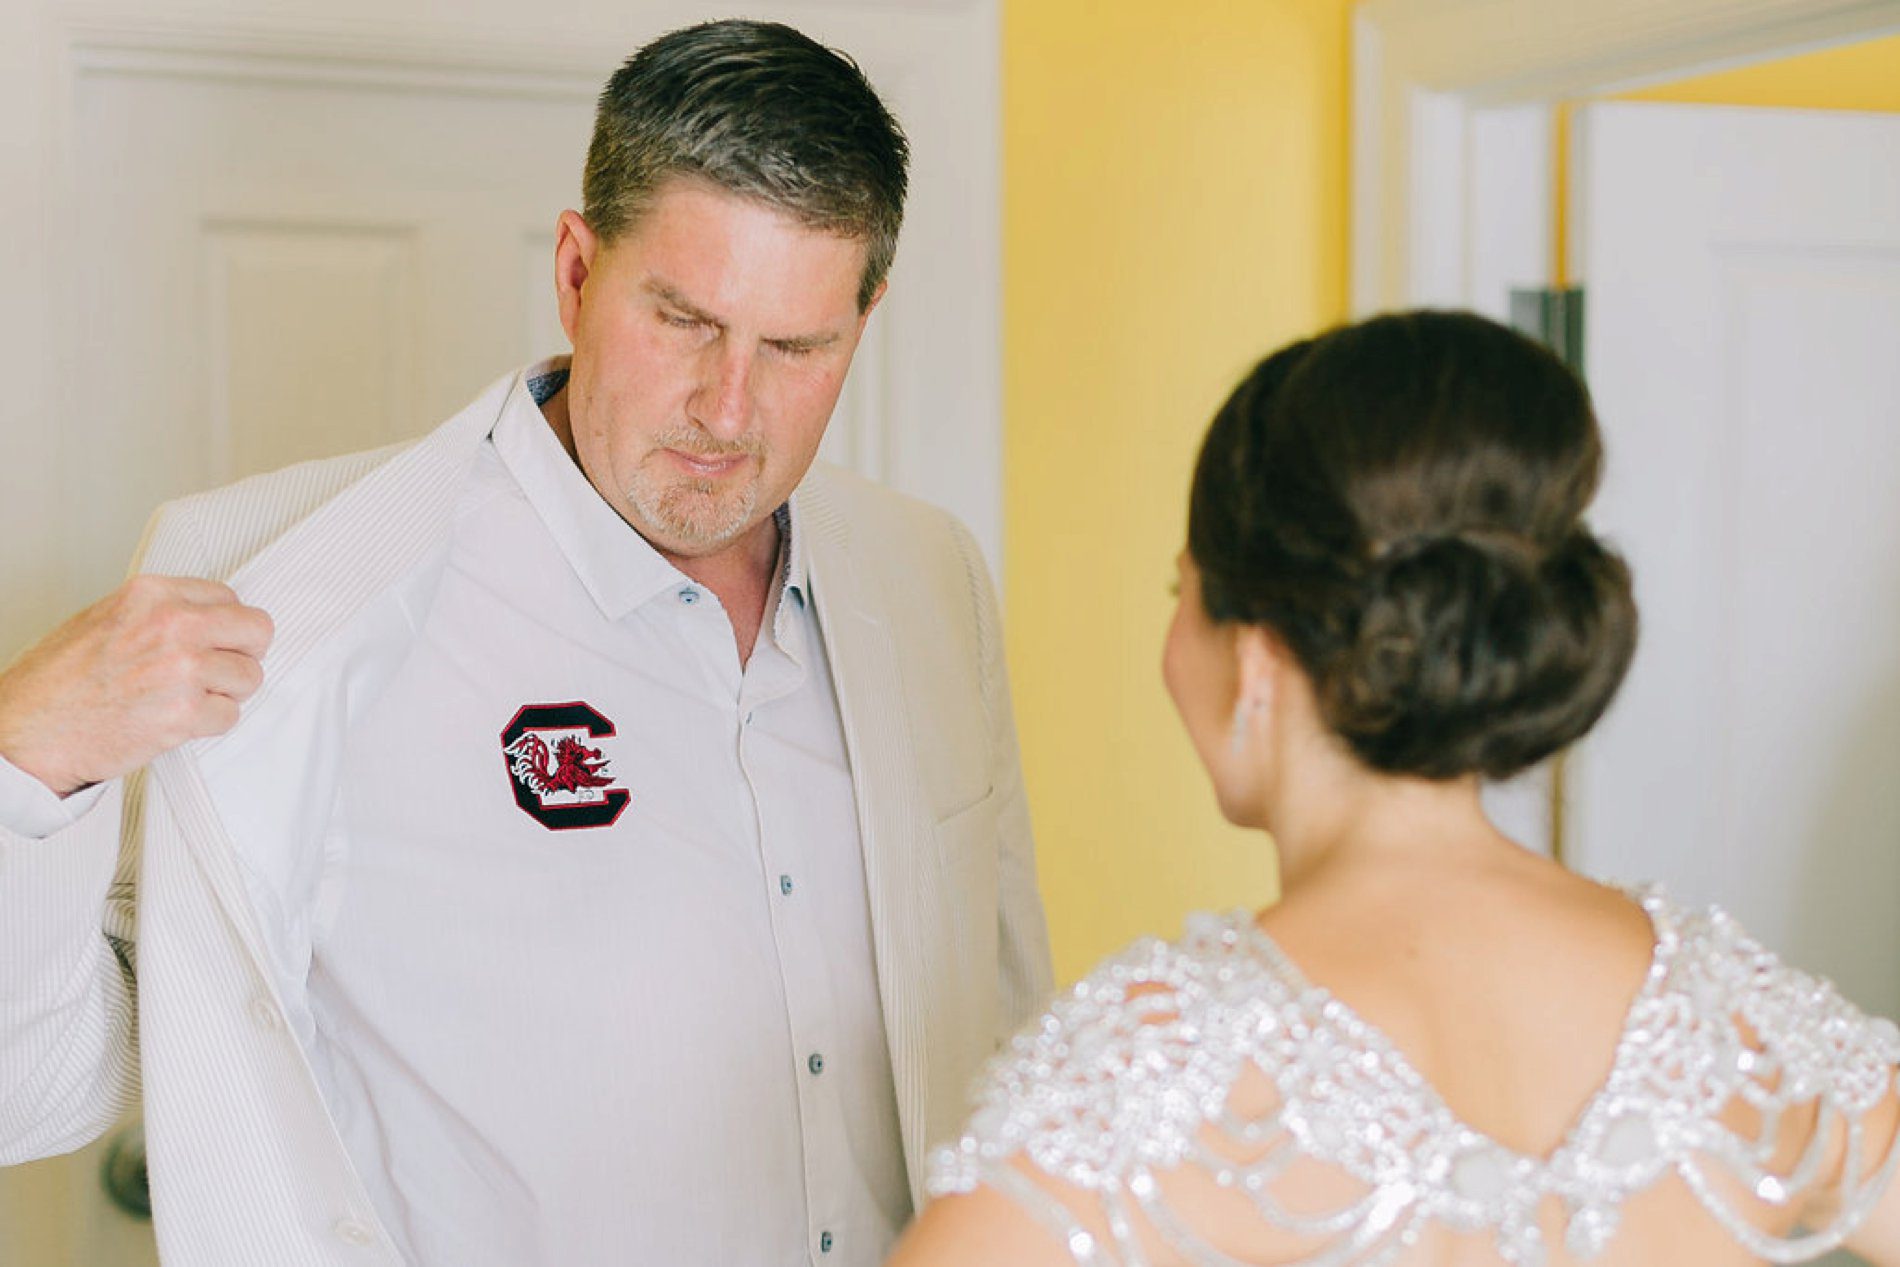 Gamecocks shirt for father of the bride